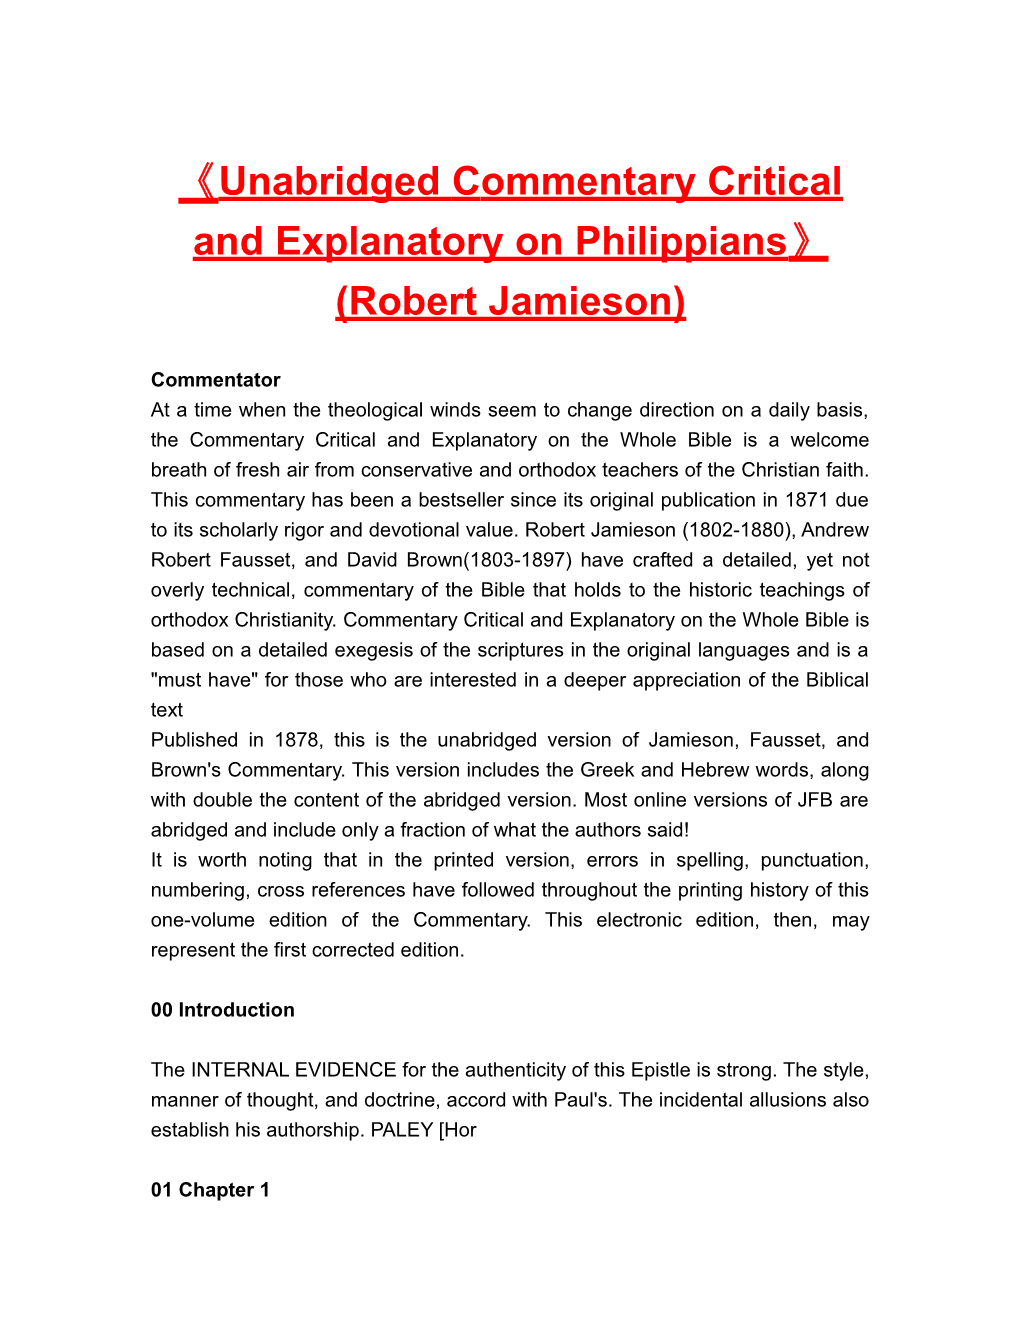 Unabridged Commentary Critical and Explanatory on Philippians (Robert Jamieson)